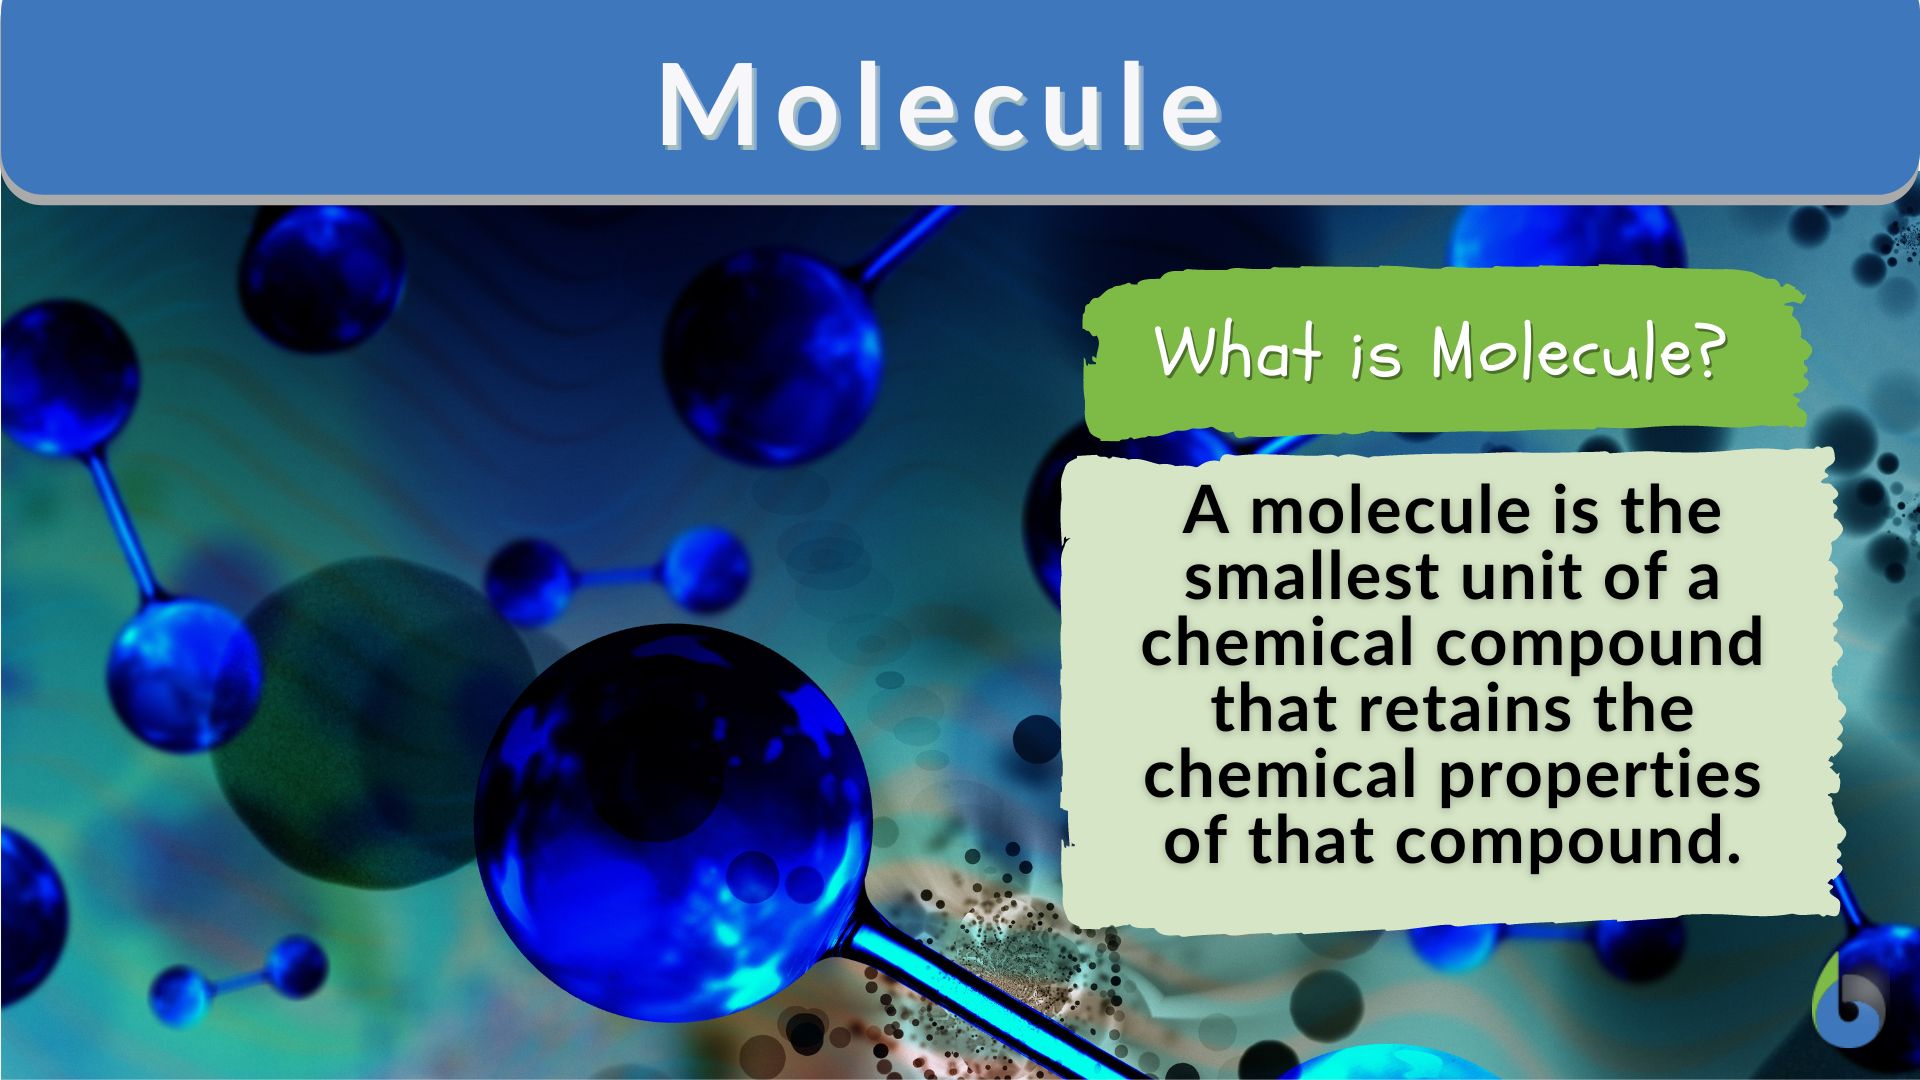 The Glucosee Molecule - Chemical and Physical Properties